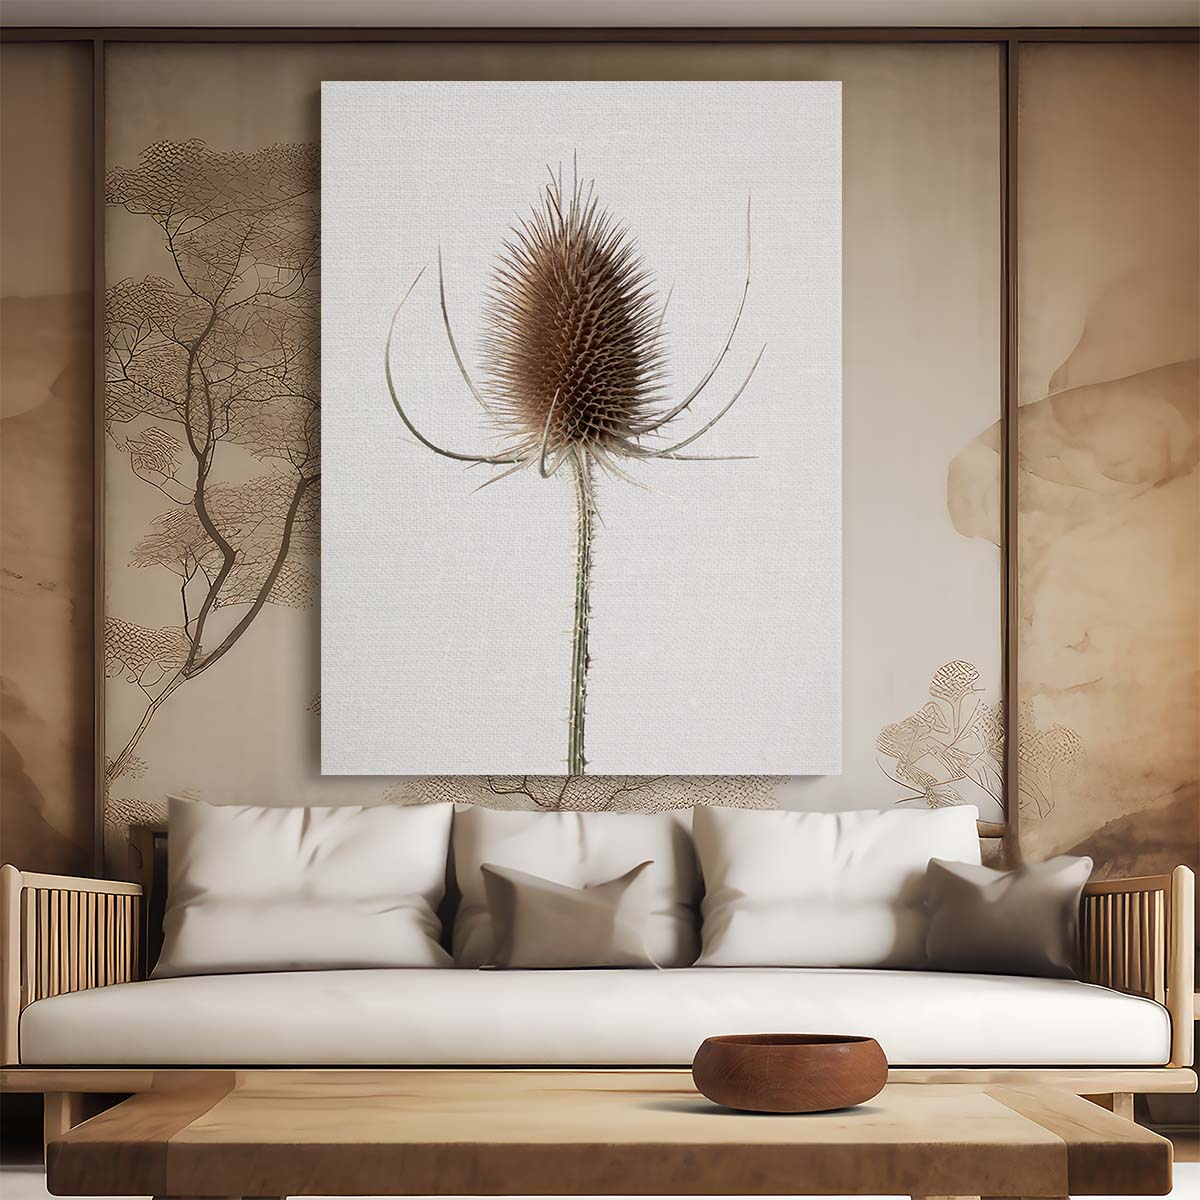 Autumn Dried Thistle Still Life Photography Art by Luxuriance Designs, made in USA